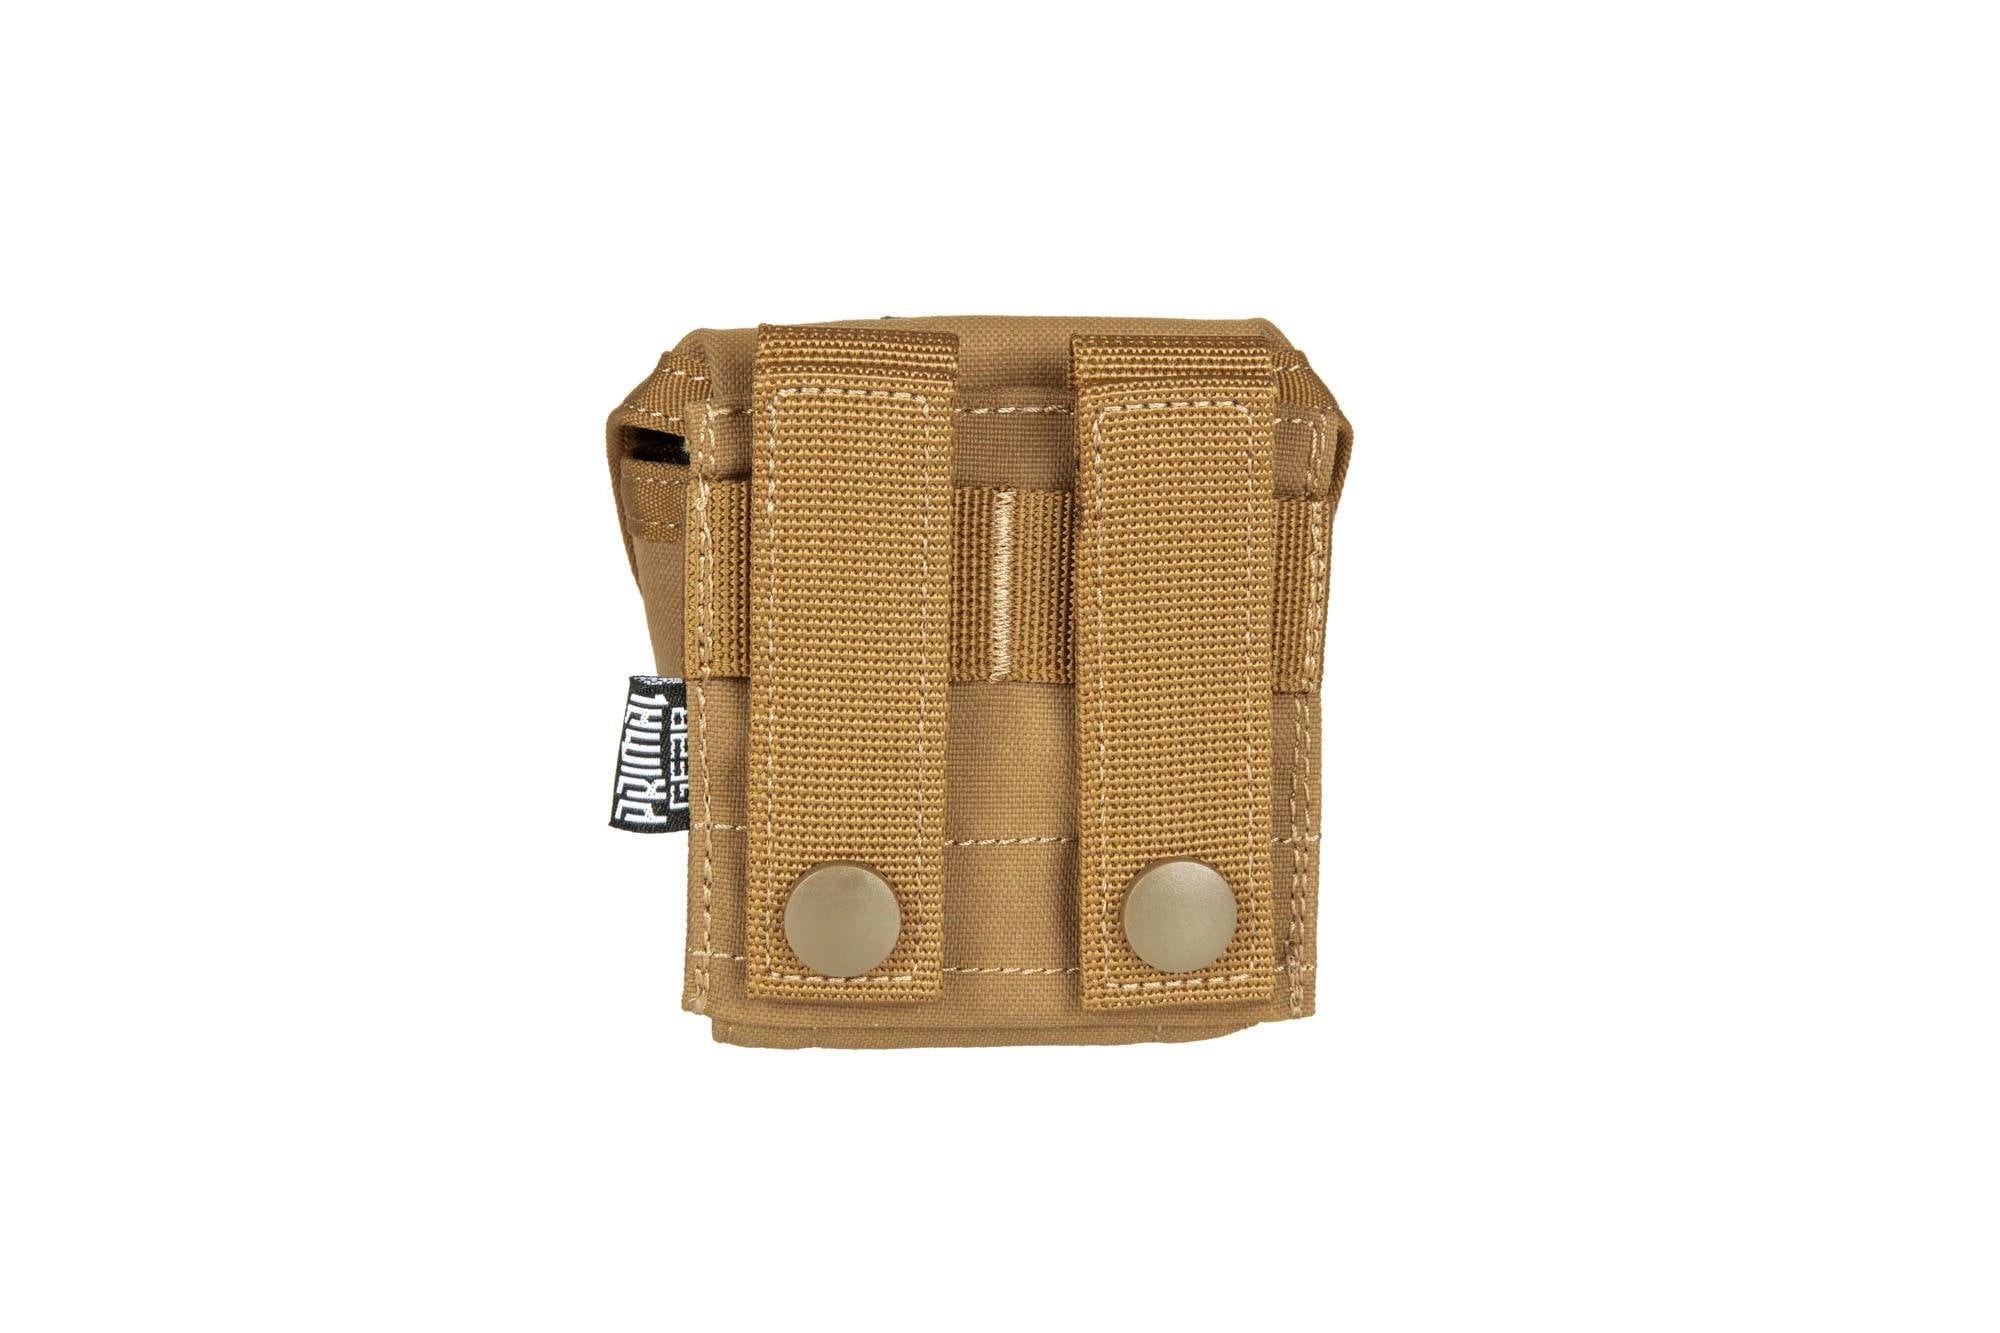 Grenade Pouch - Coyote Brown